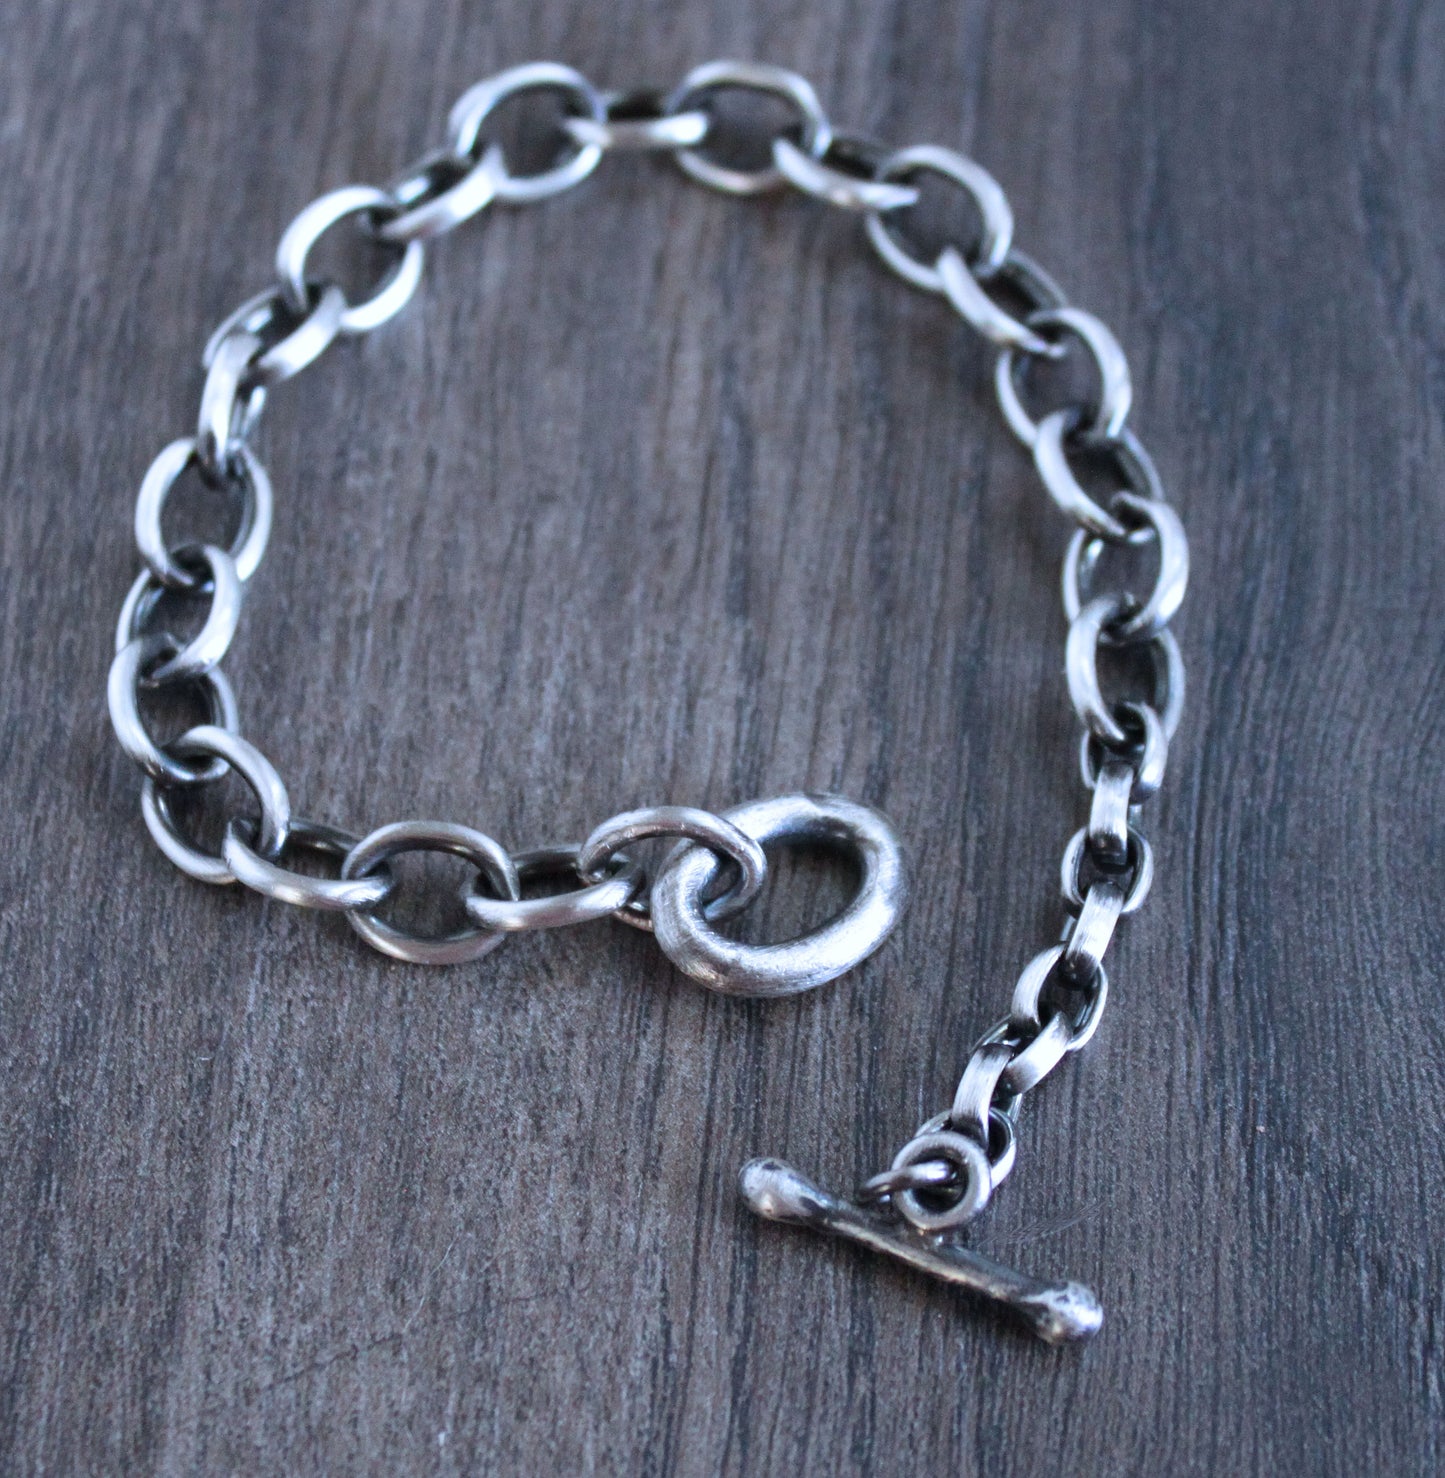 Silver Mixed Cable Chain Bracelet, Toggle Clasp